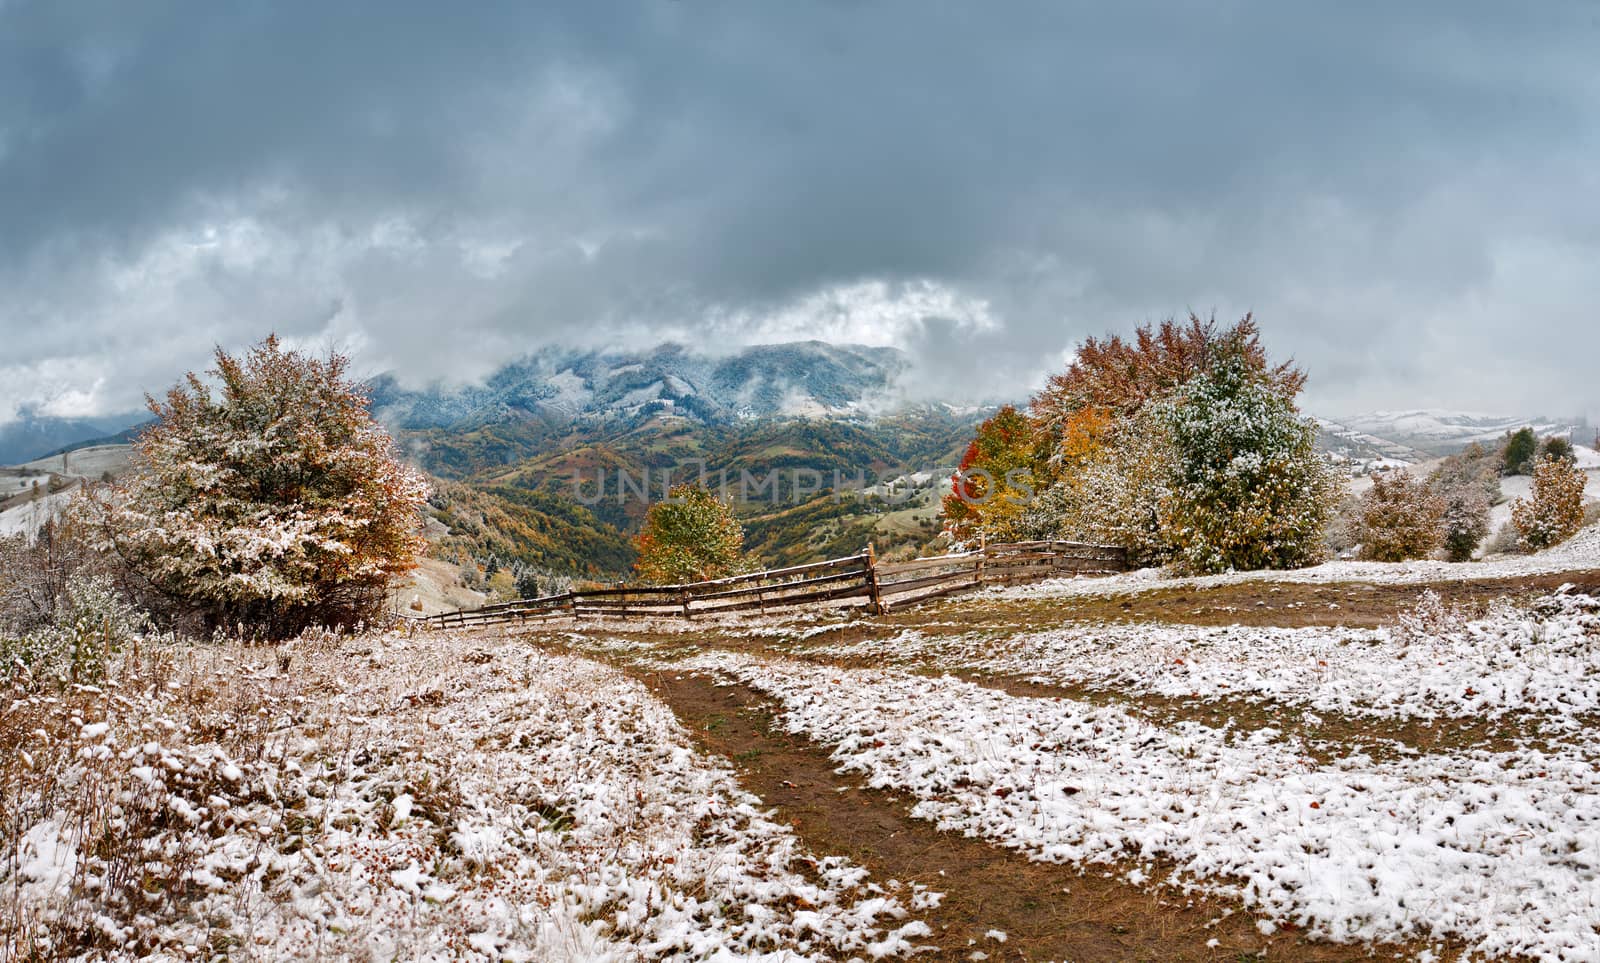 First snow in autumn. Snowfall in mountain village by weise_maxim